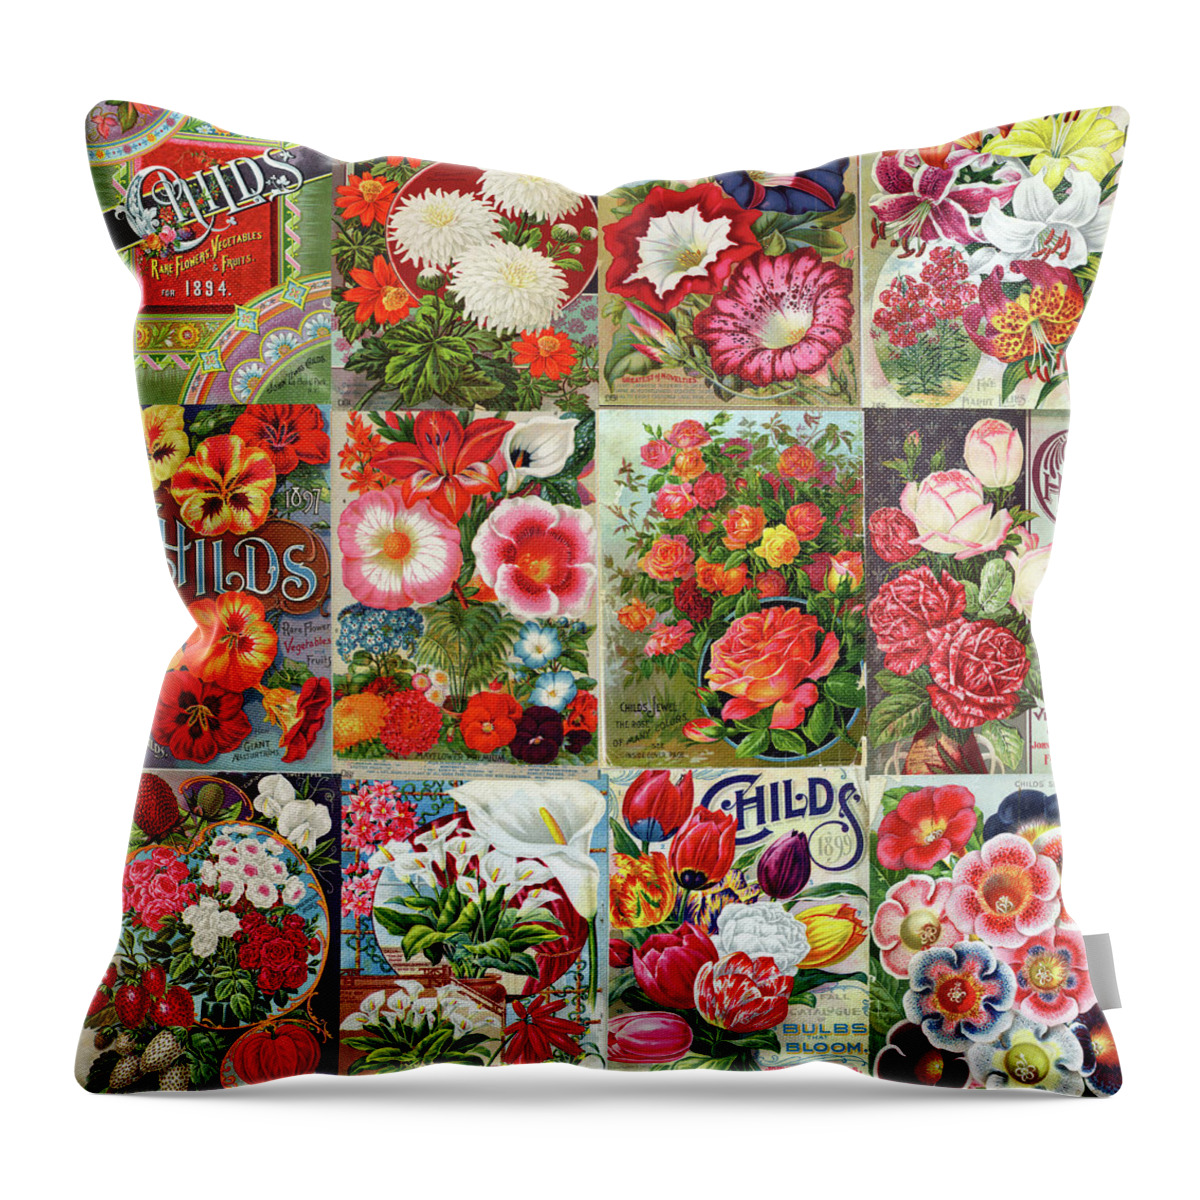 Childs Nursery Throw Pillow featuring the photograph Vintage Childs Nursery Flower Seed Packets Mosaic by Peggy Collins